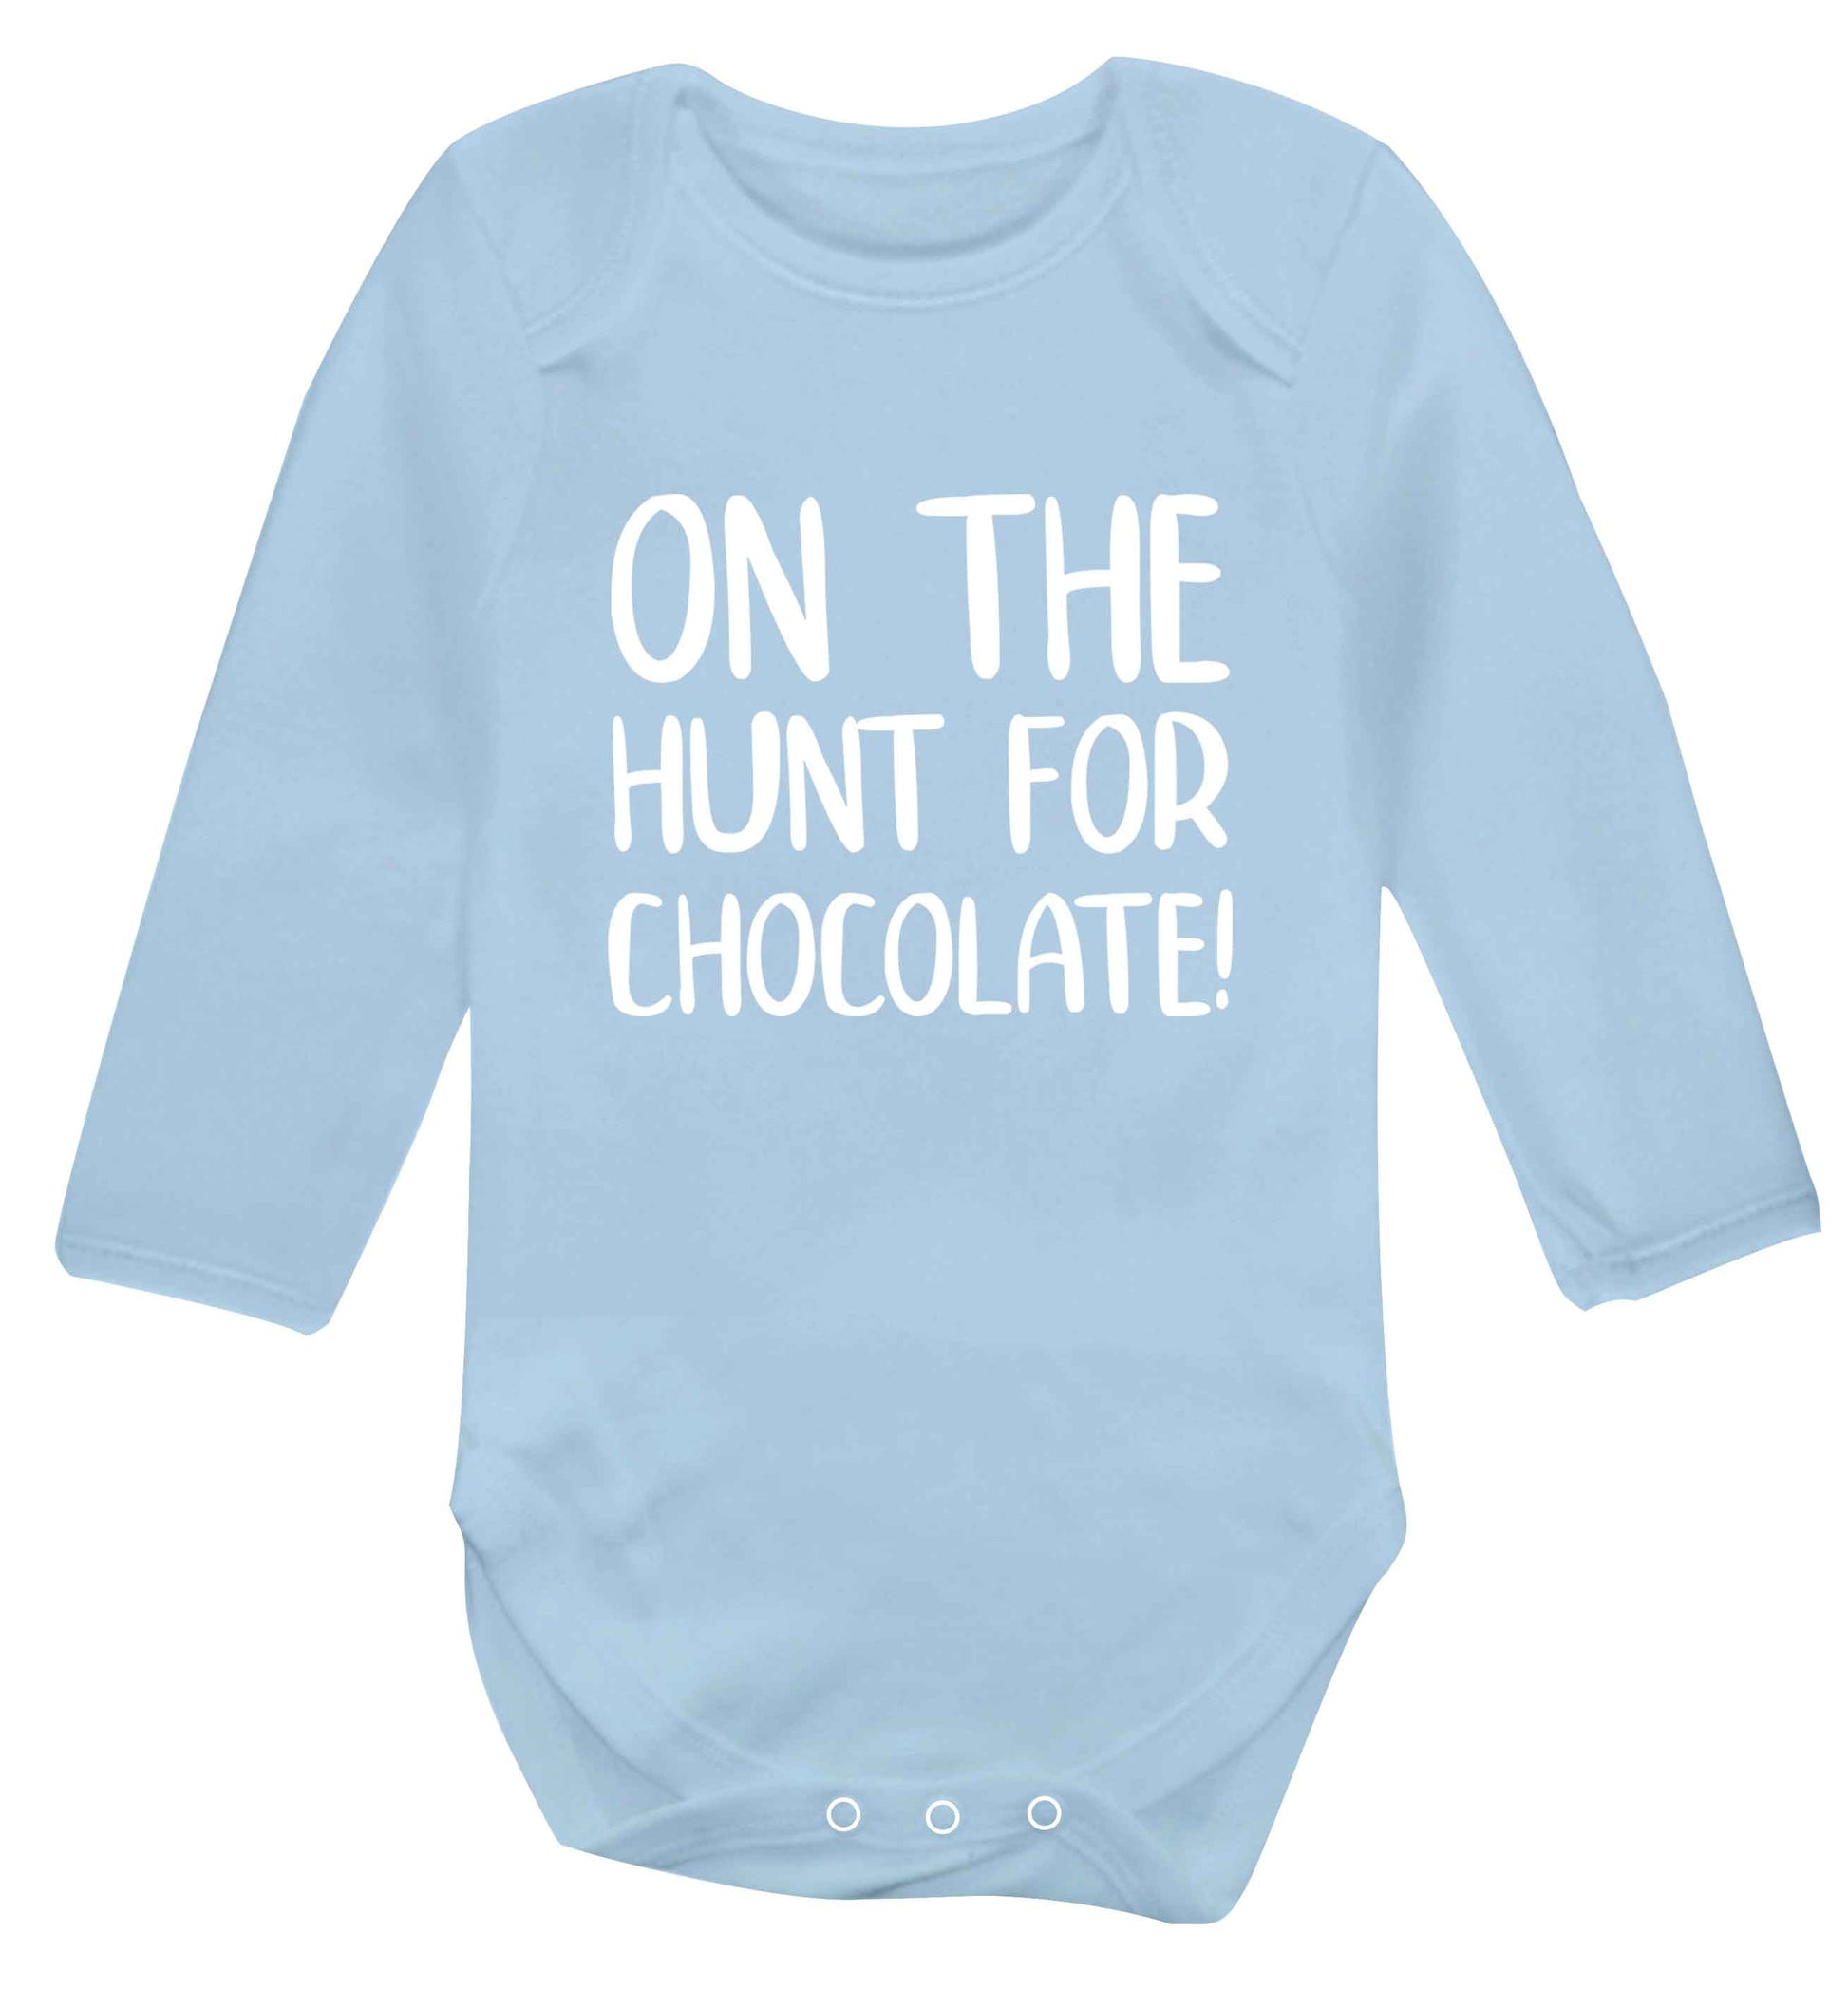 On the hunt for chocolate! baby vest long sleeved pale blue 6-12 months